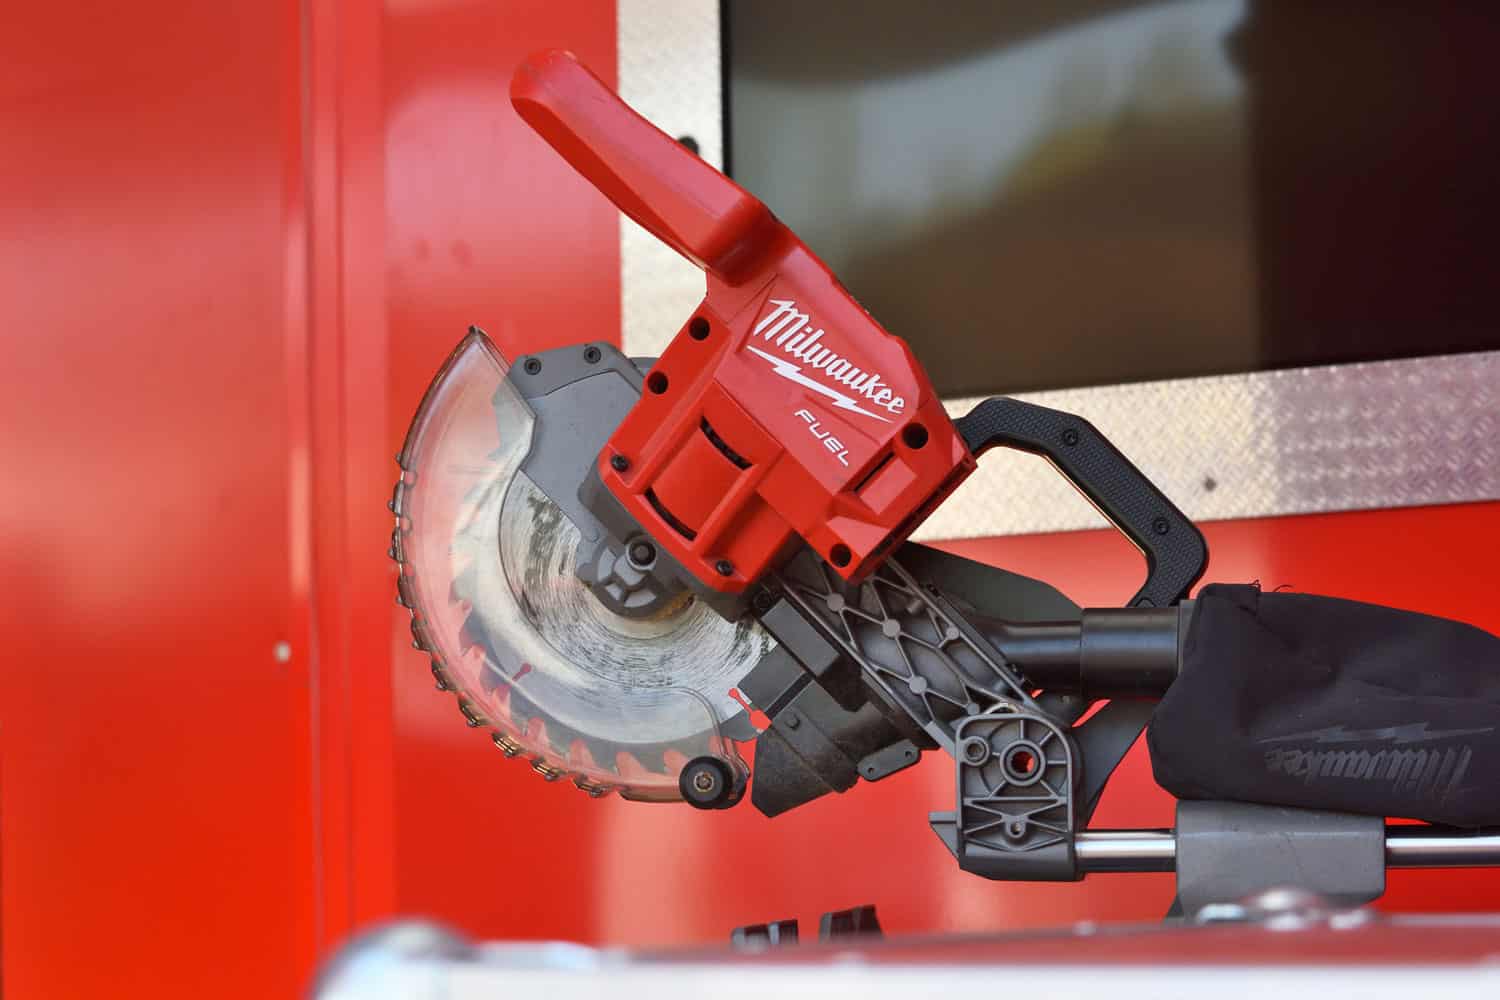 The Milwaukee Electric Tool Corporation produces power tools and hand tools